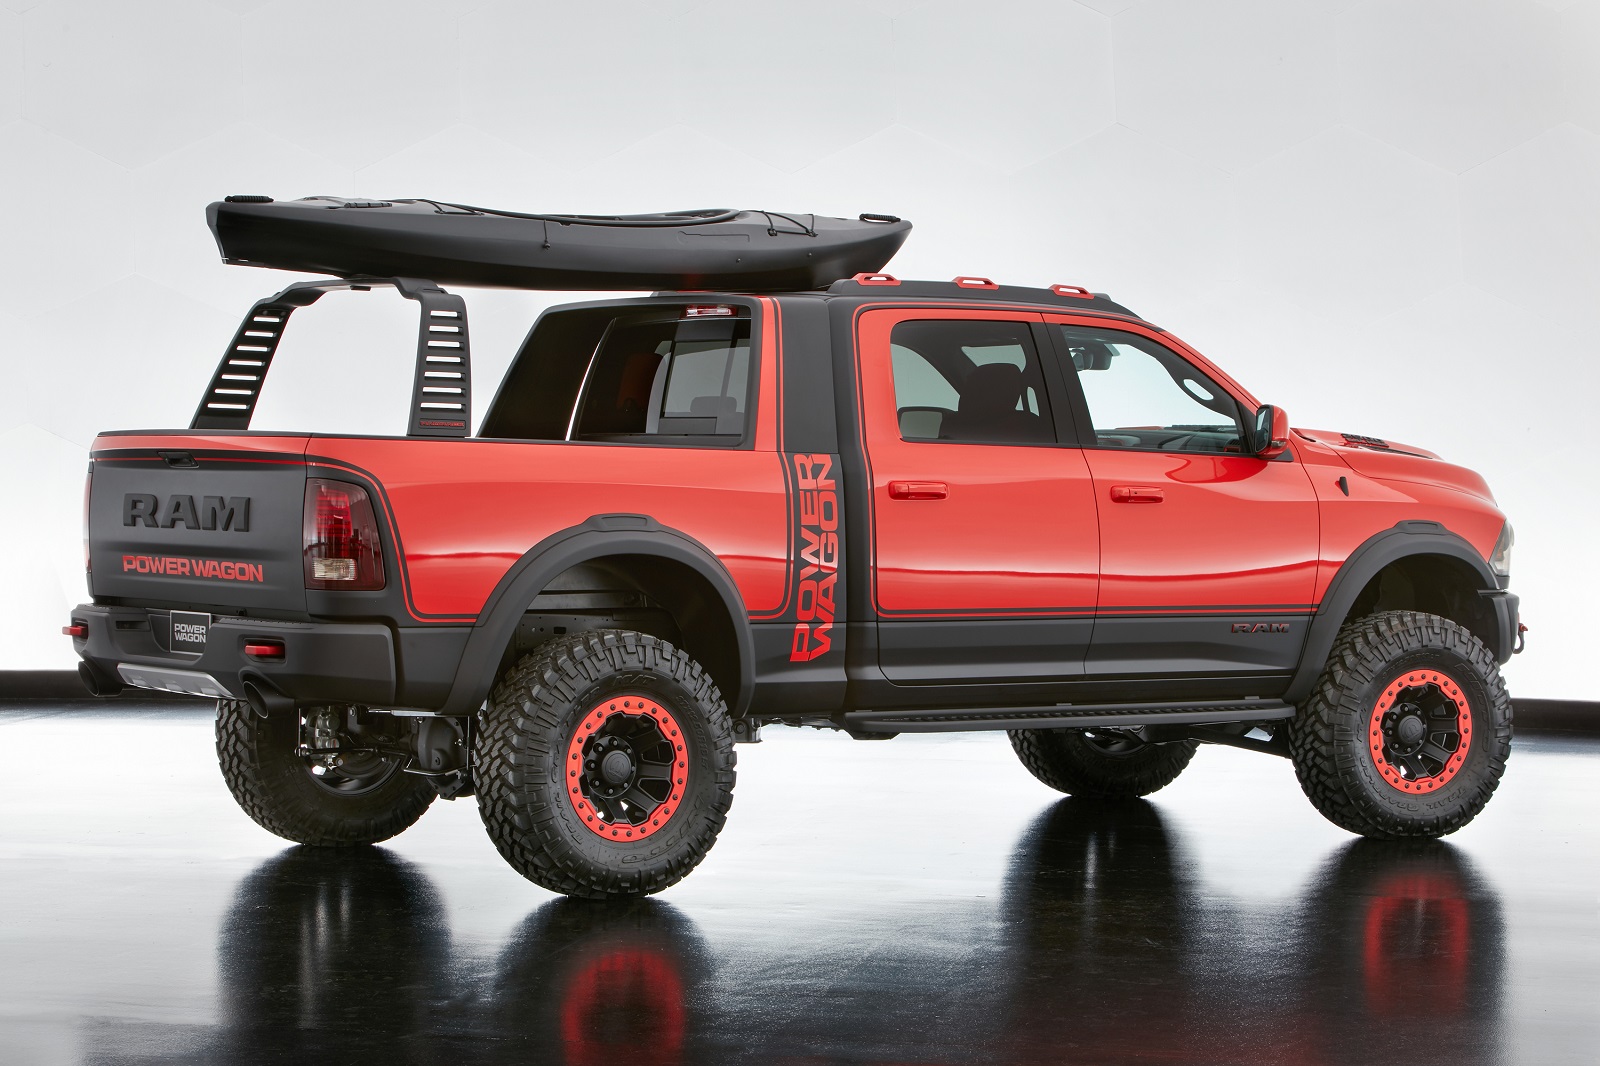 Adaptability is showcased in the 6-ft. x 4-in. bed of the Ram Macho Power Wagon, where a Mopar concept Satin Black accessory sliding RamRack securely stores toys to fit a variety of lifestyles.